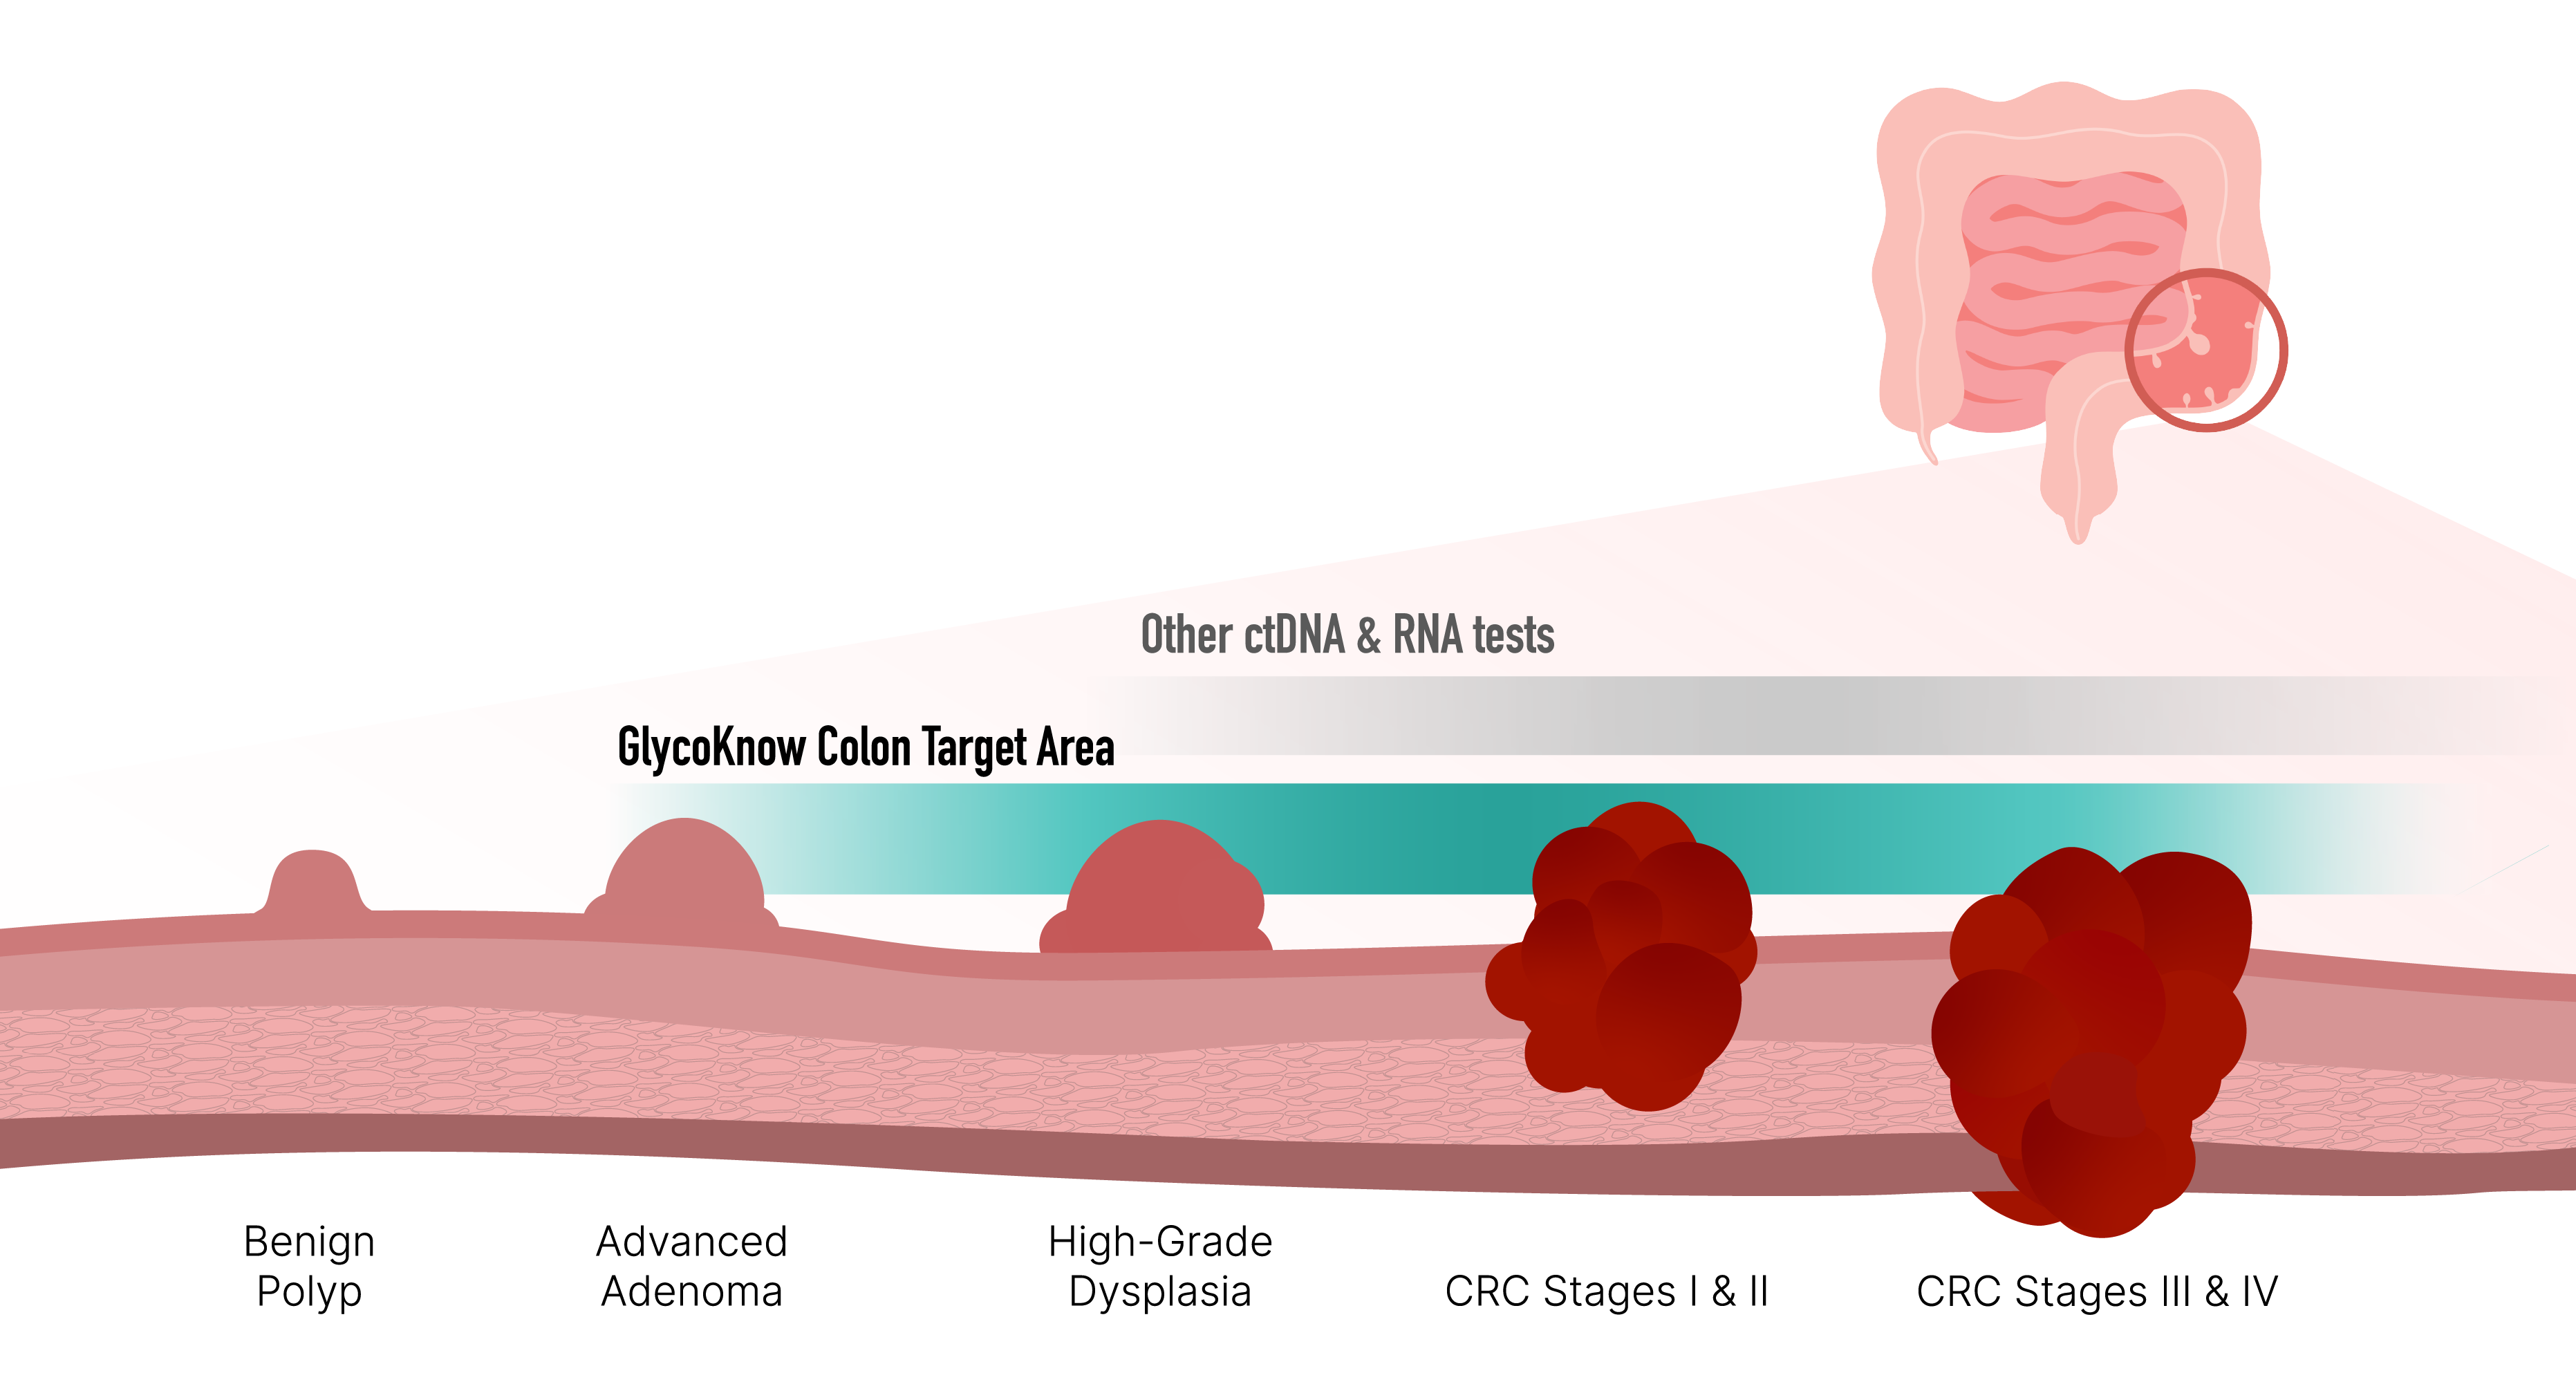 colon cancer progression with glycoknow colon target area extended from high grade dysplasia to stage 4